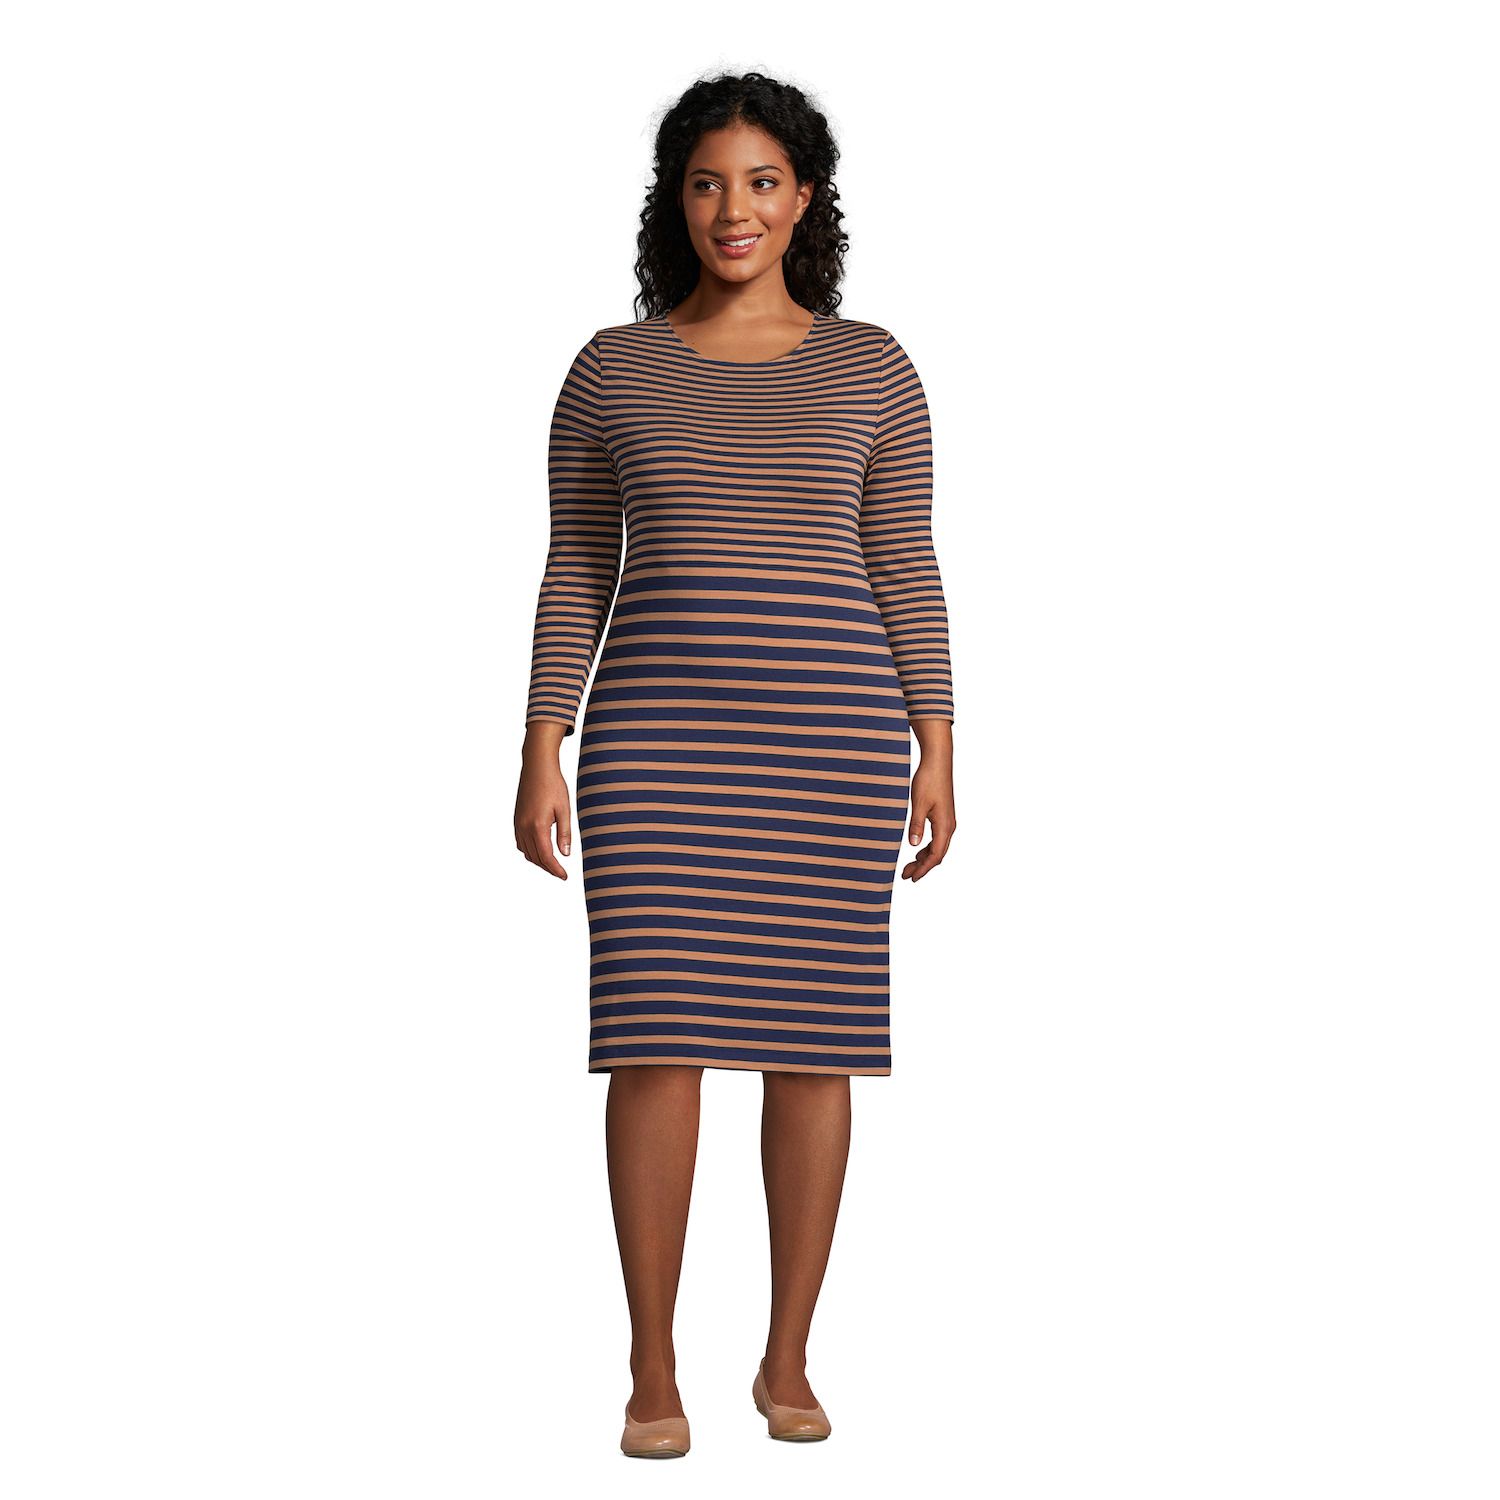 Image for Lands' End Plus Size 3/4 Sleeve T-Shirt Dress at Kohl's.